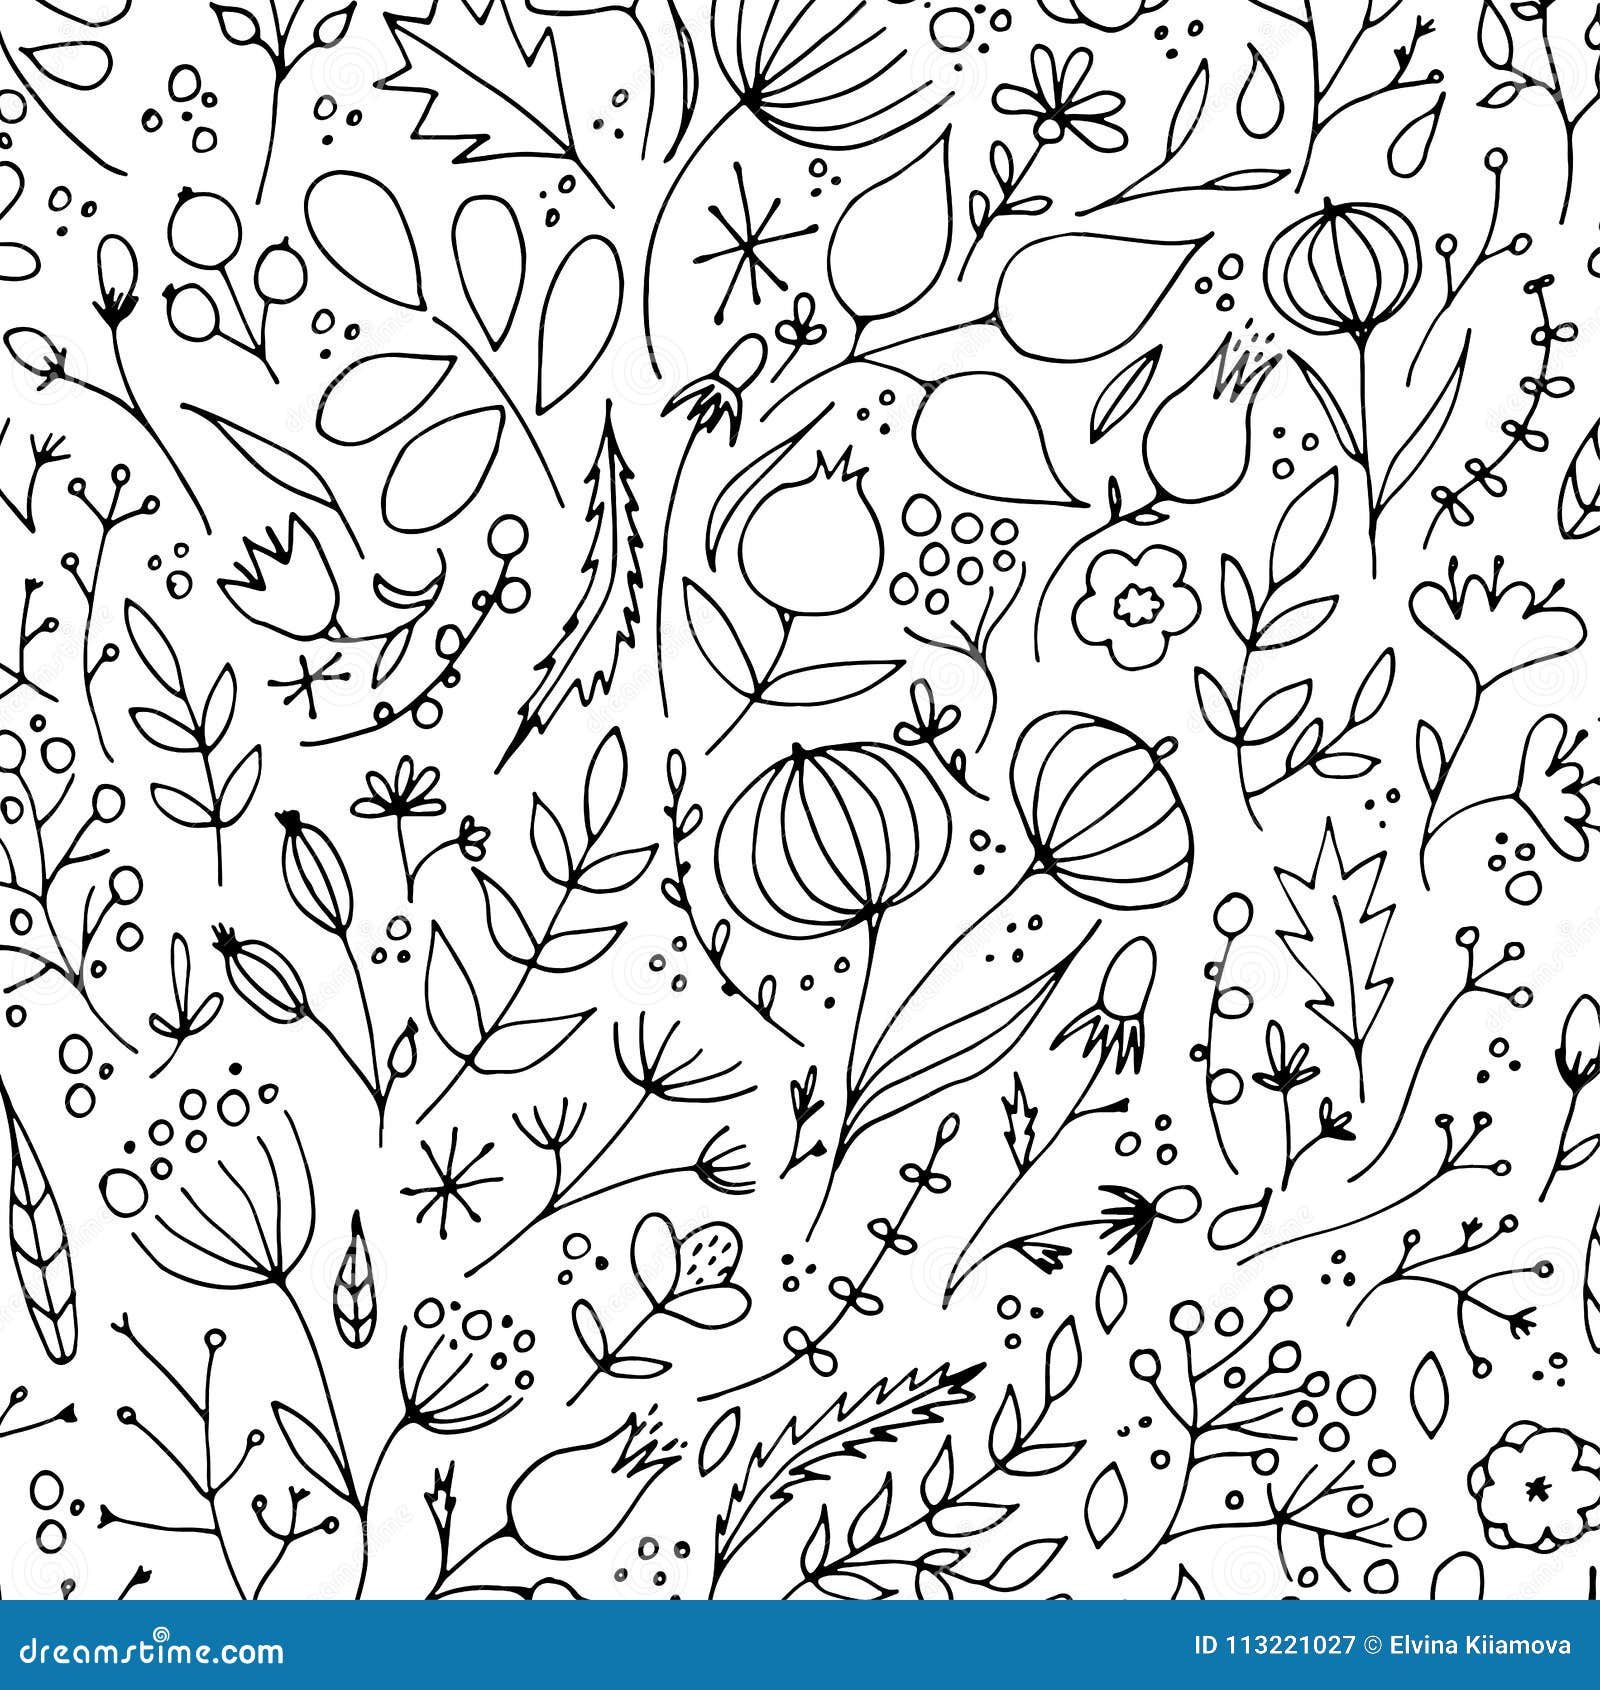 hand drawn floral pattern.